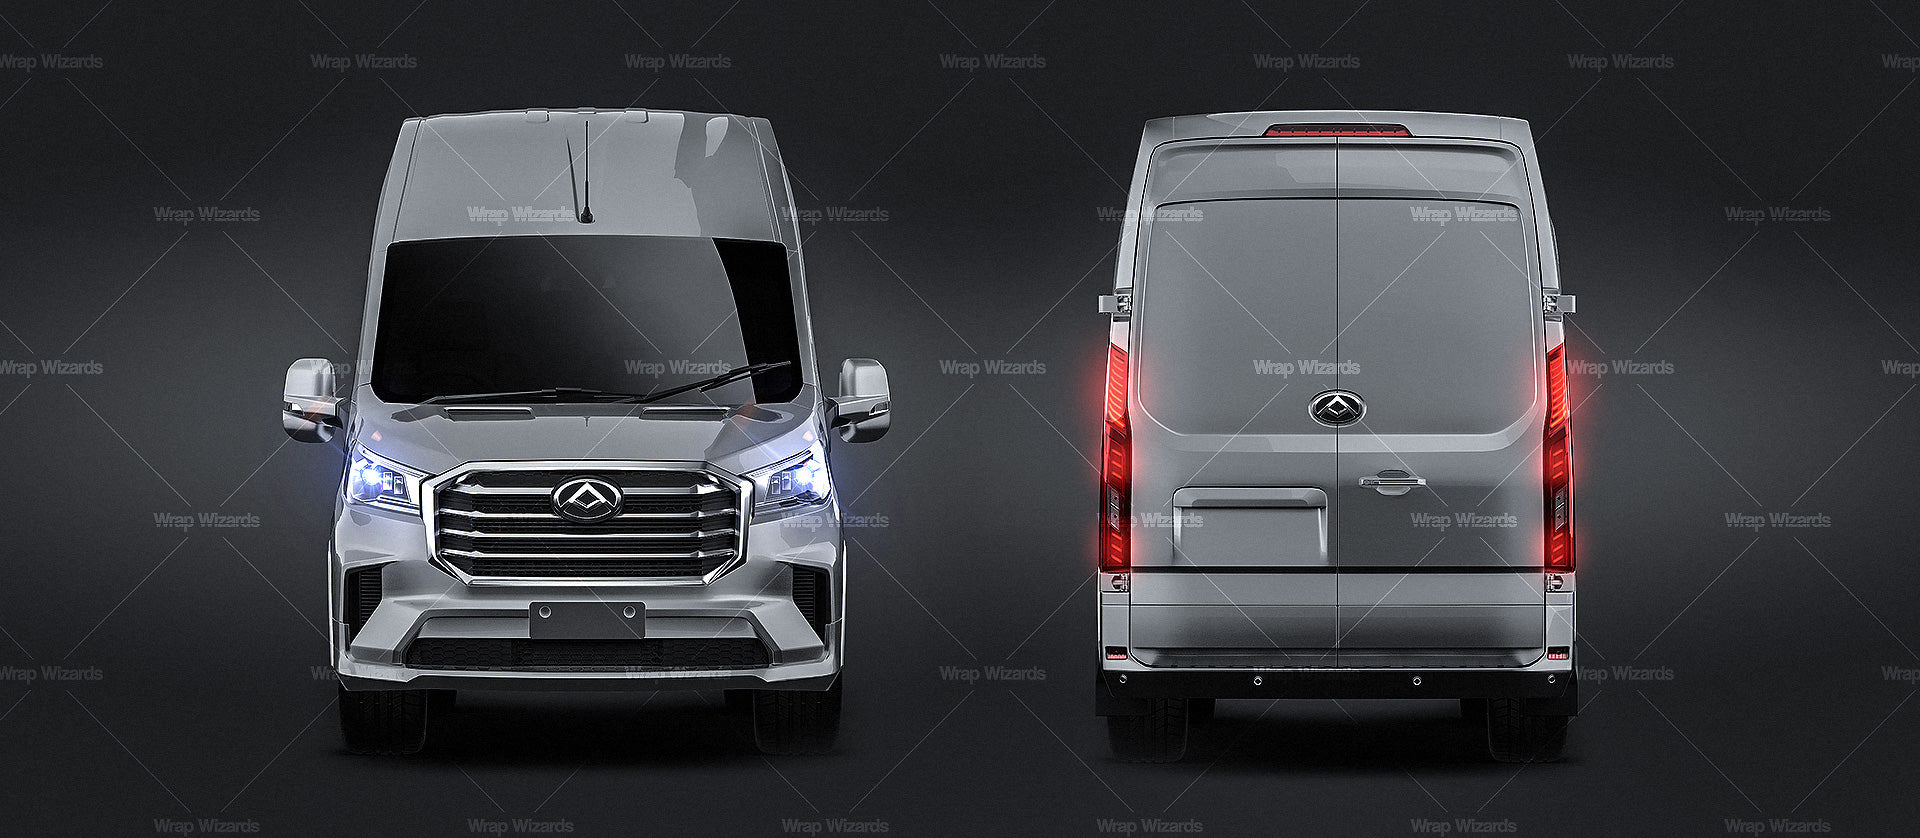 Maxus Deliver 9 | LDV Deliver 9 L3H3 2022 glossy finish - all sides Car Mockup Template.psd